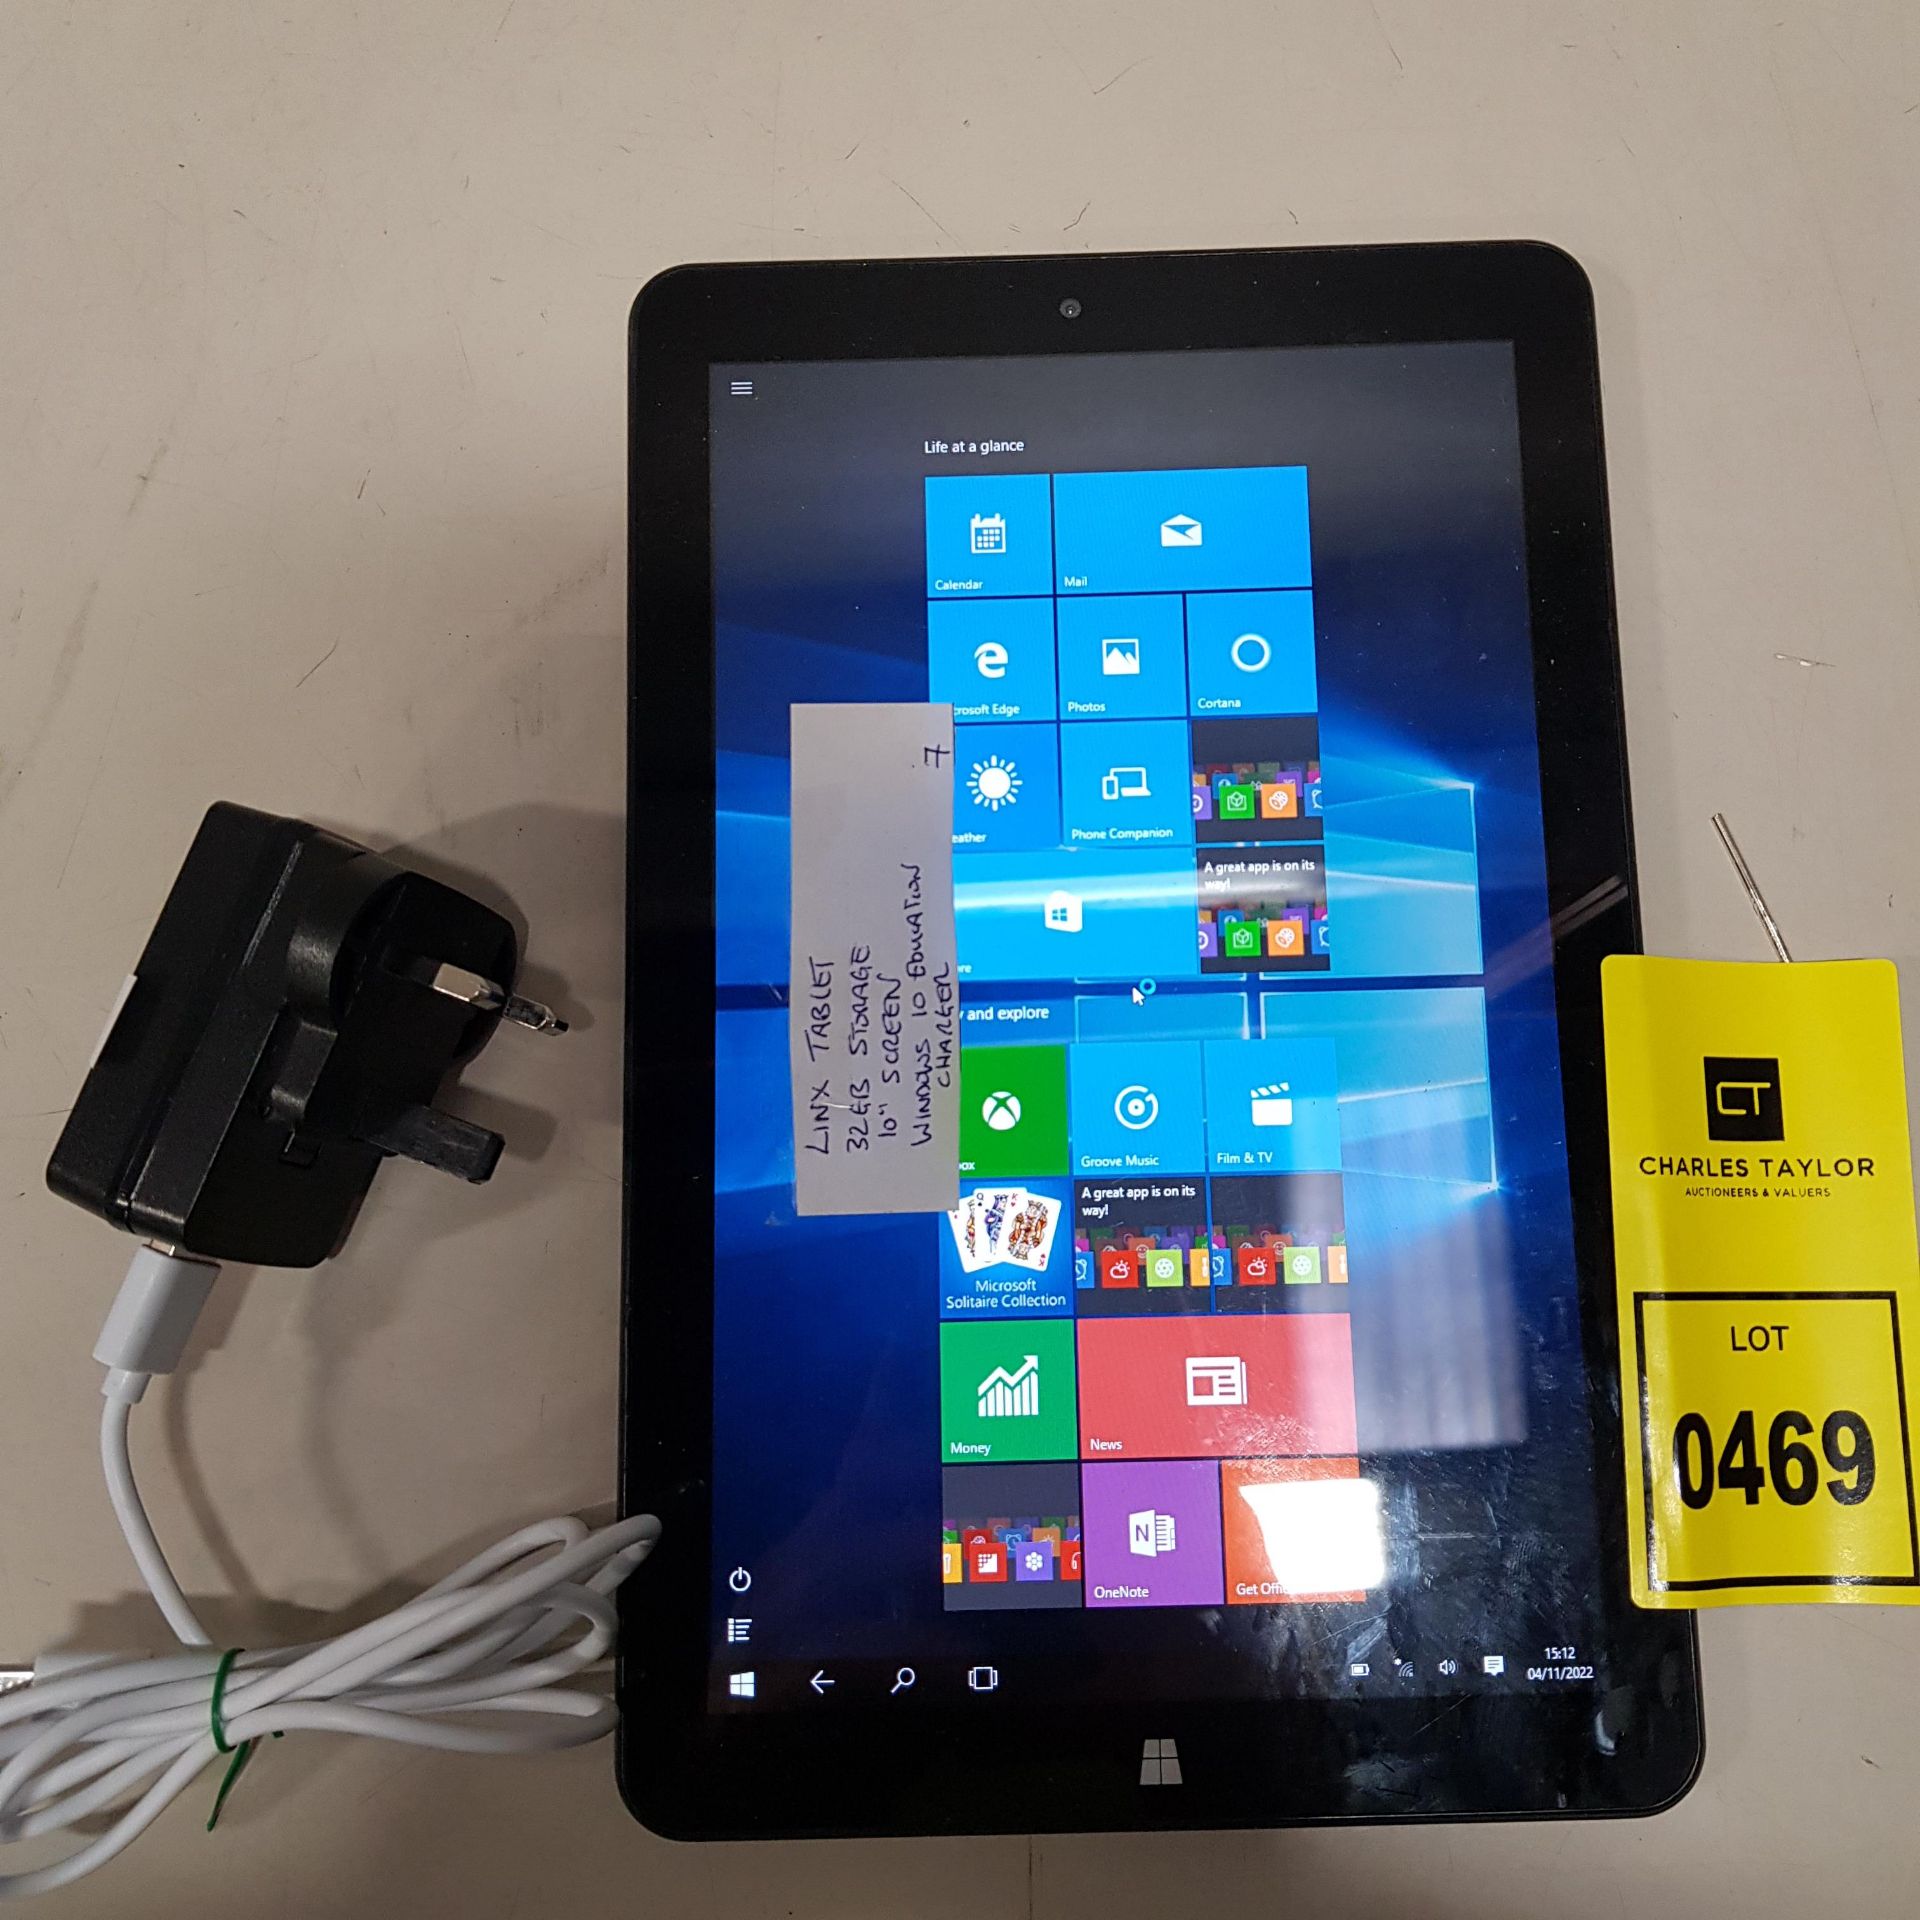 LINX TABLET 32GB STORAGE 10 SCREEN WINDOWS 10 PRO EDUCATION WITH CHARGER